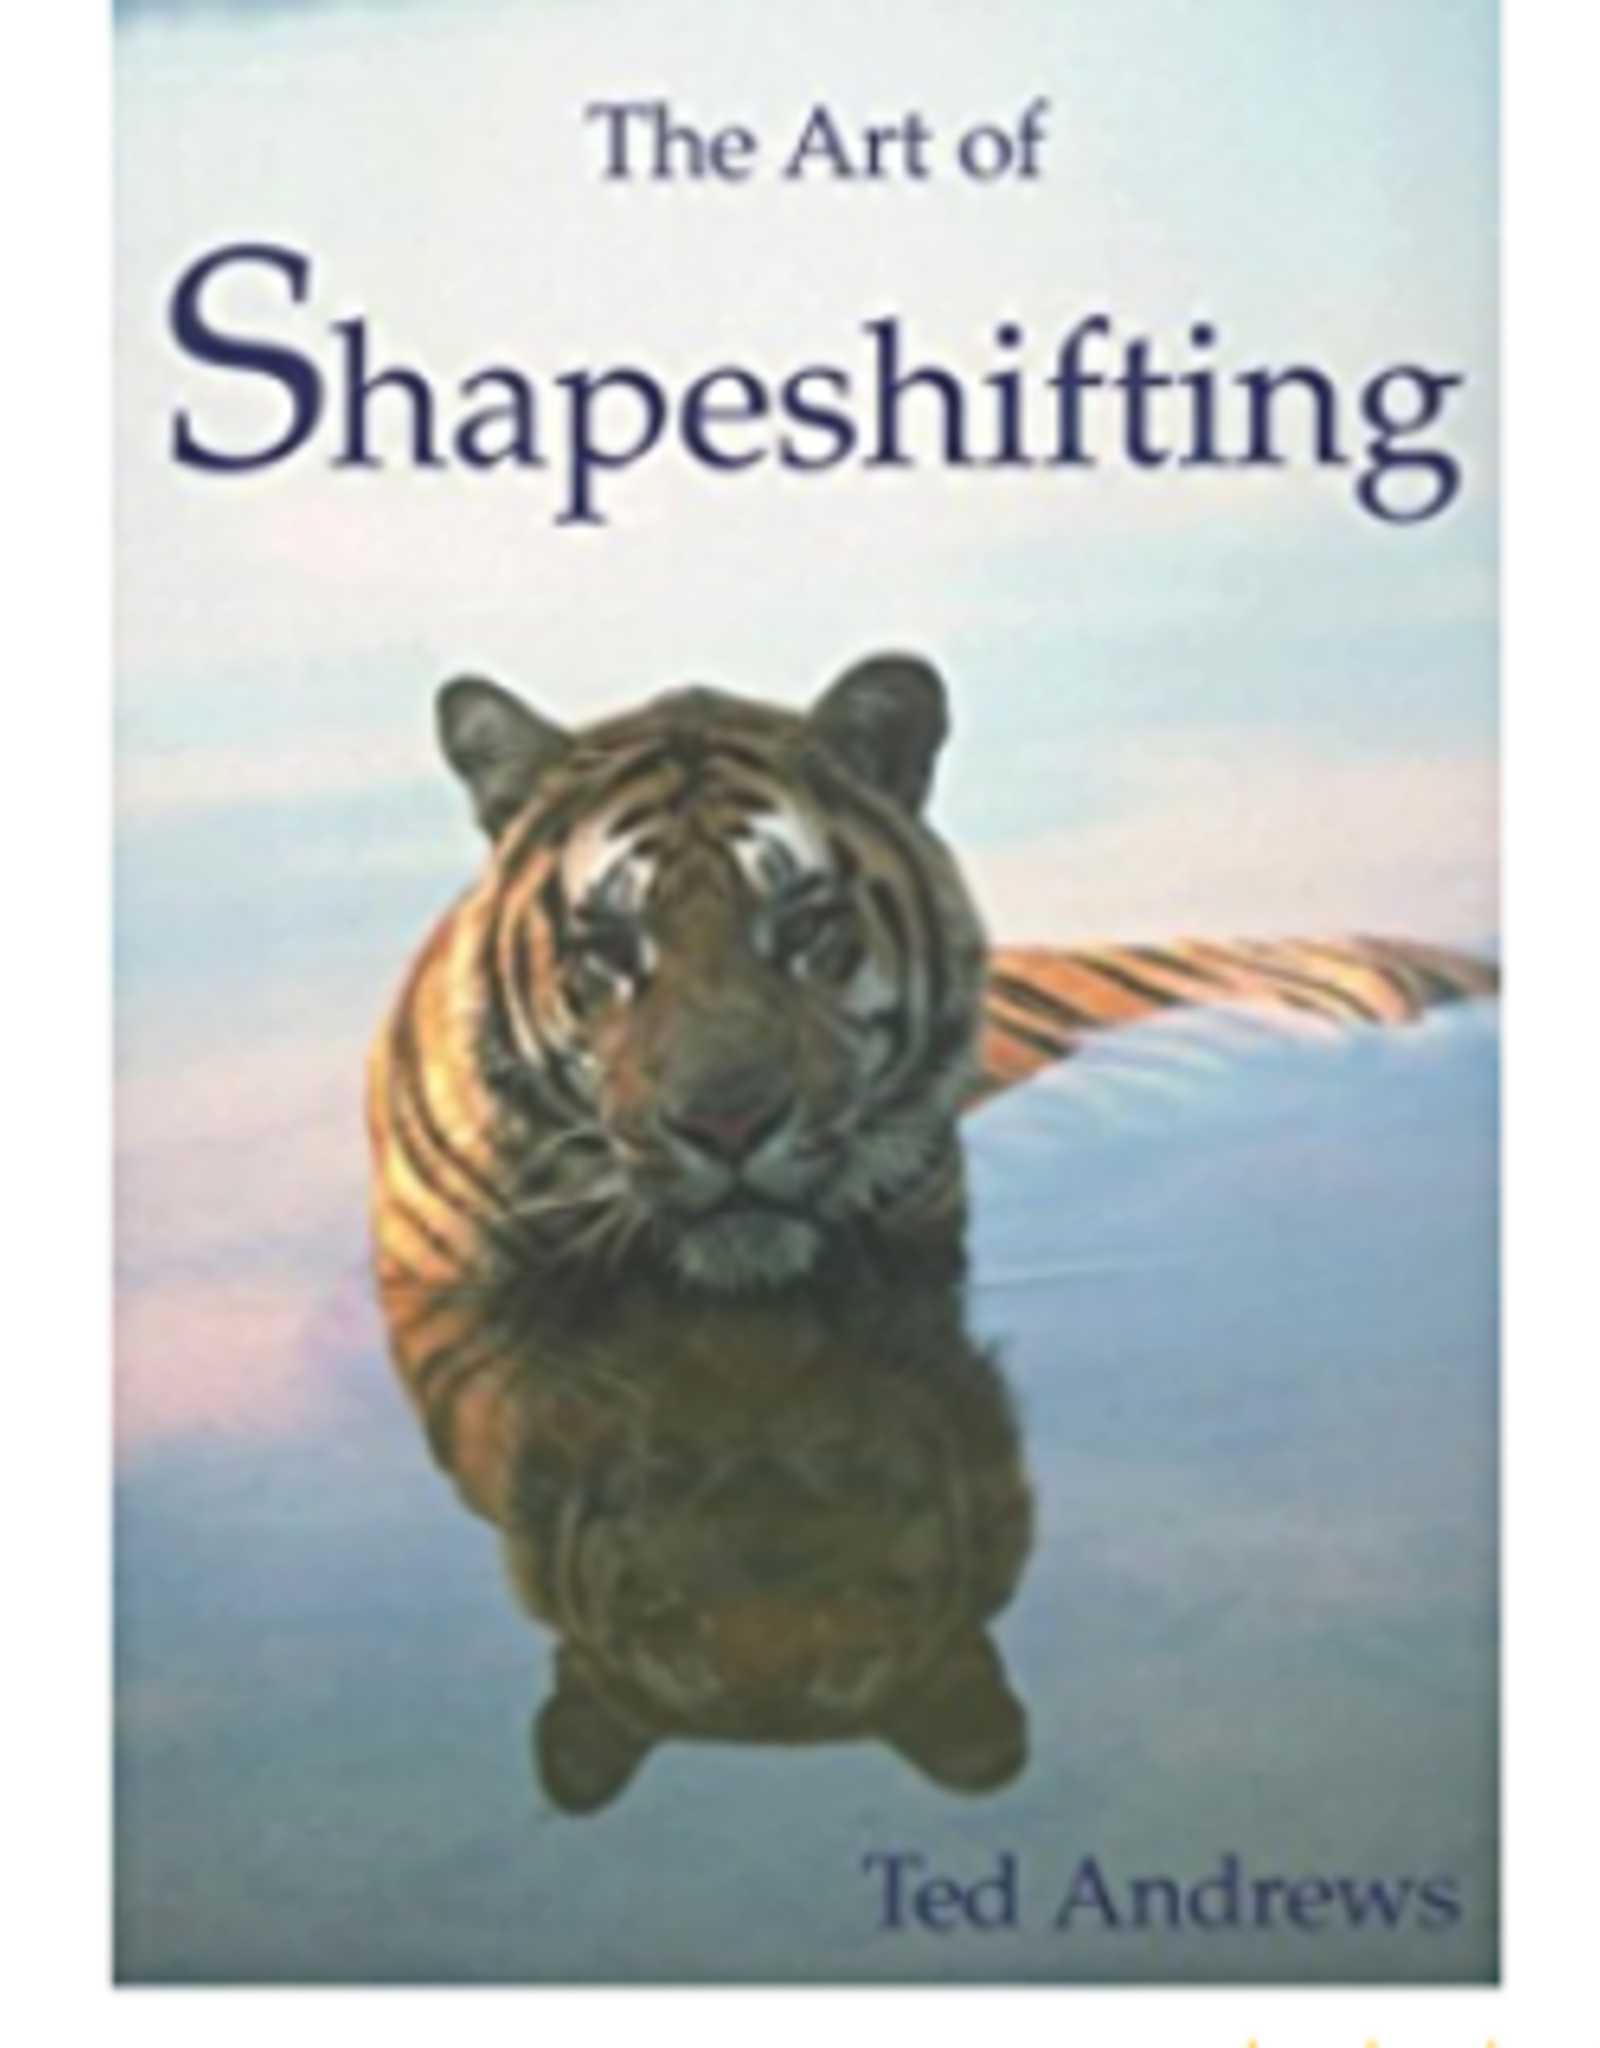 Ted Andrews Art of Shapeshifting by Ted Andrews